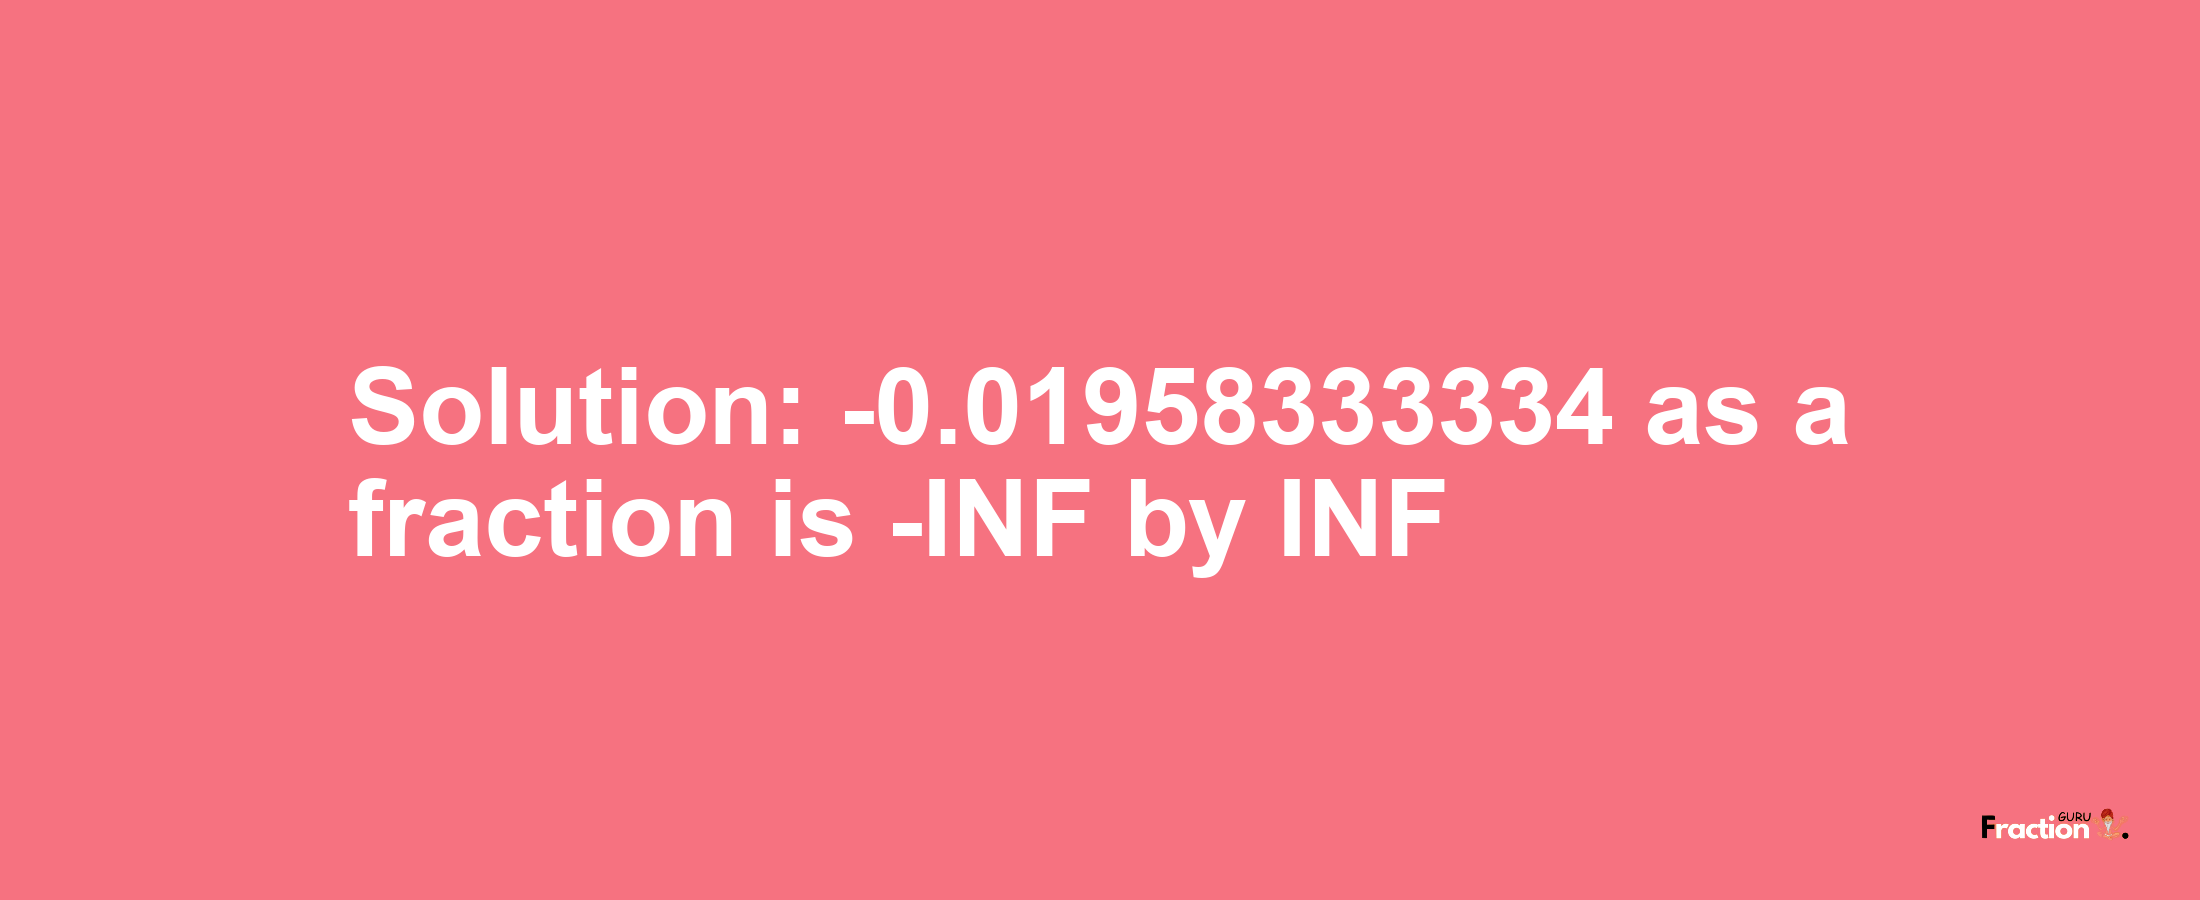 Solution:-0.01958333334 as a fraction is -INF/INF